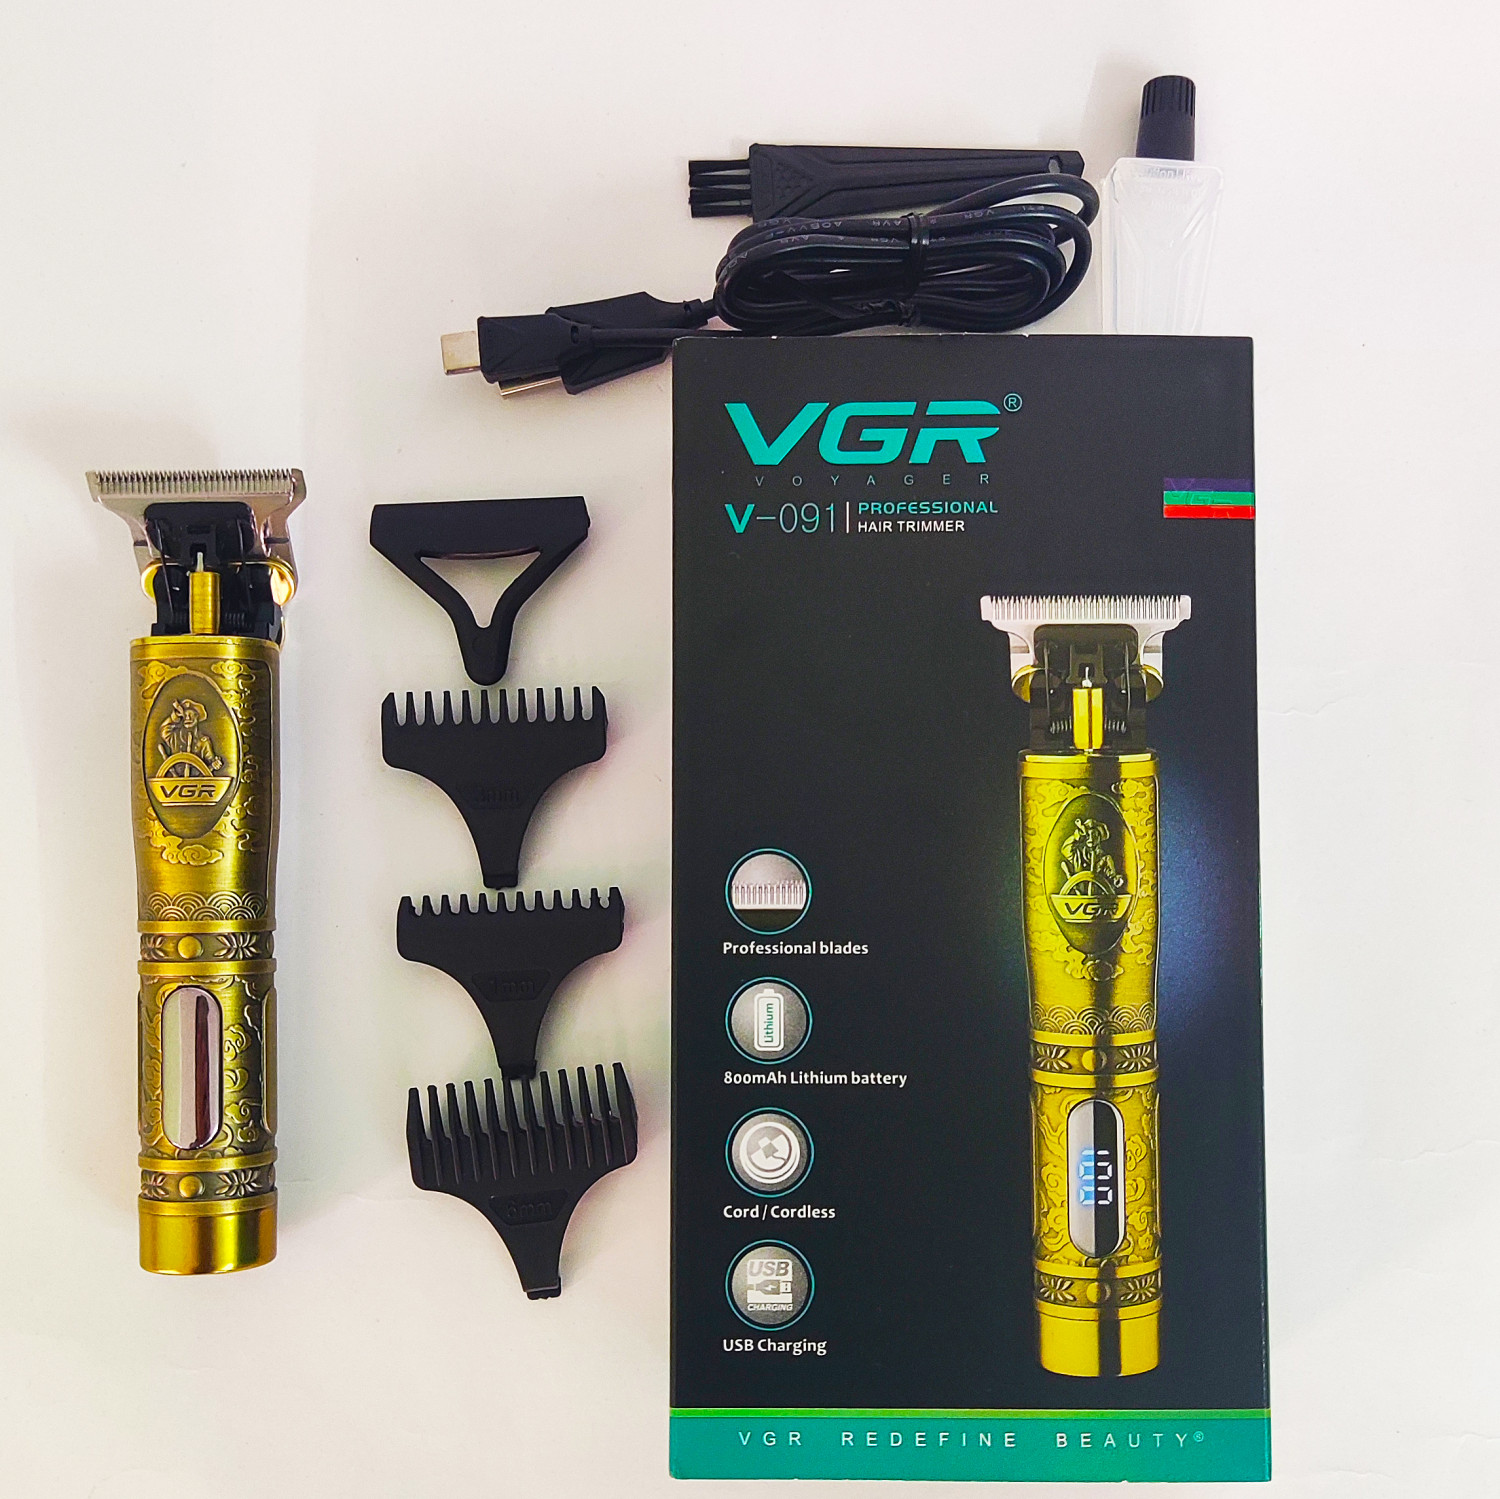 VGR V-091 Cordless Professional Hair trimmer with Digital Display and USB charging